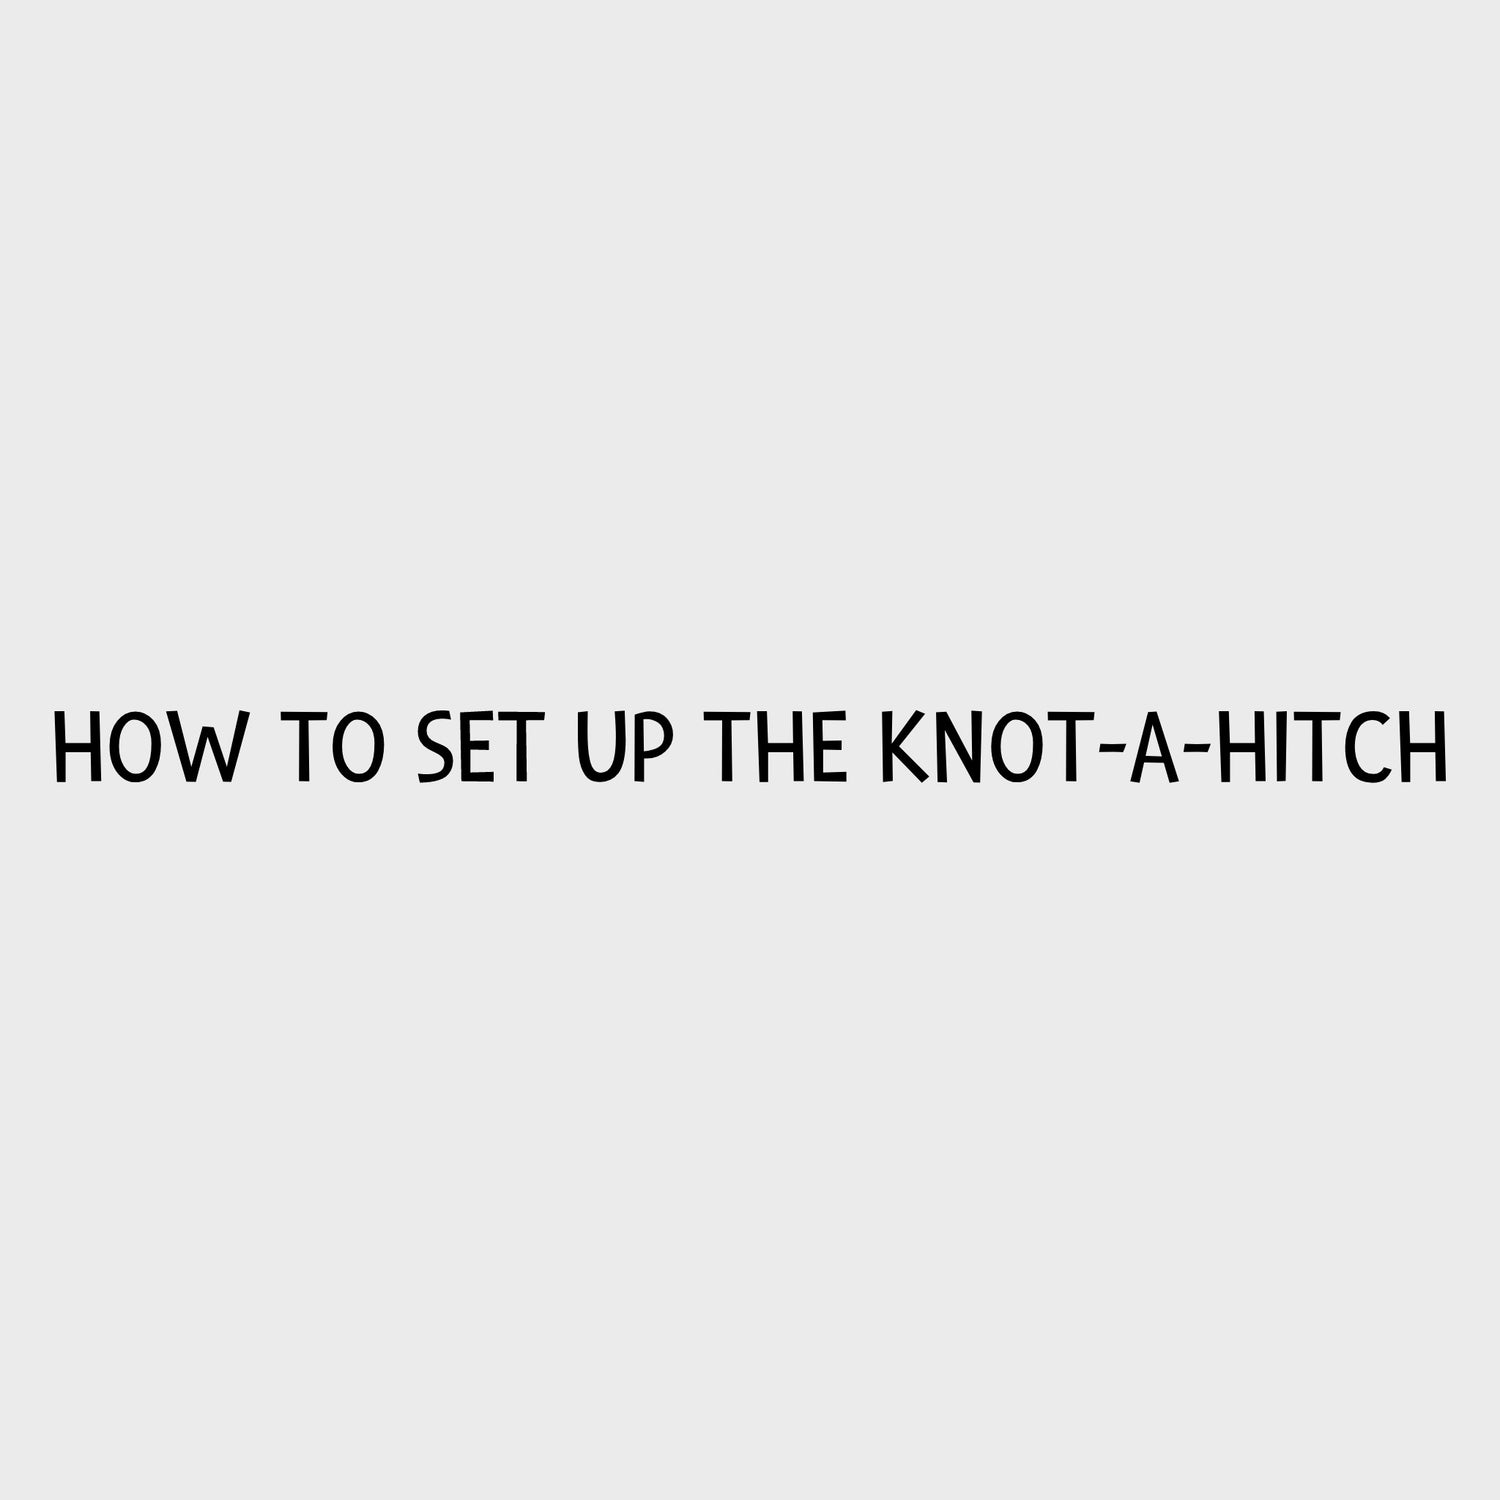 Video - How to seat up the Knot-a-Hitch